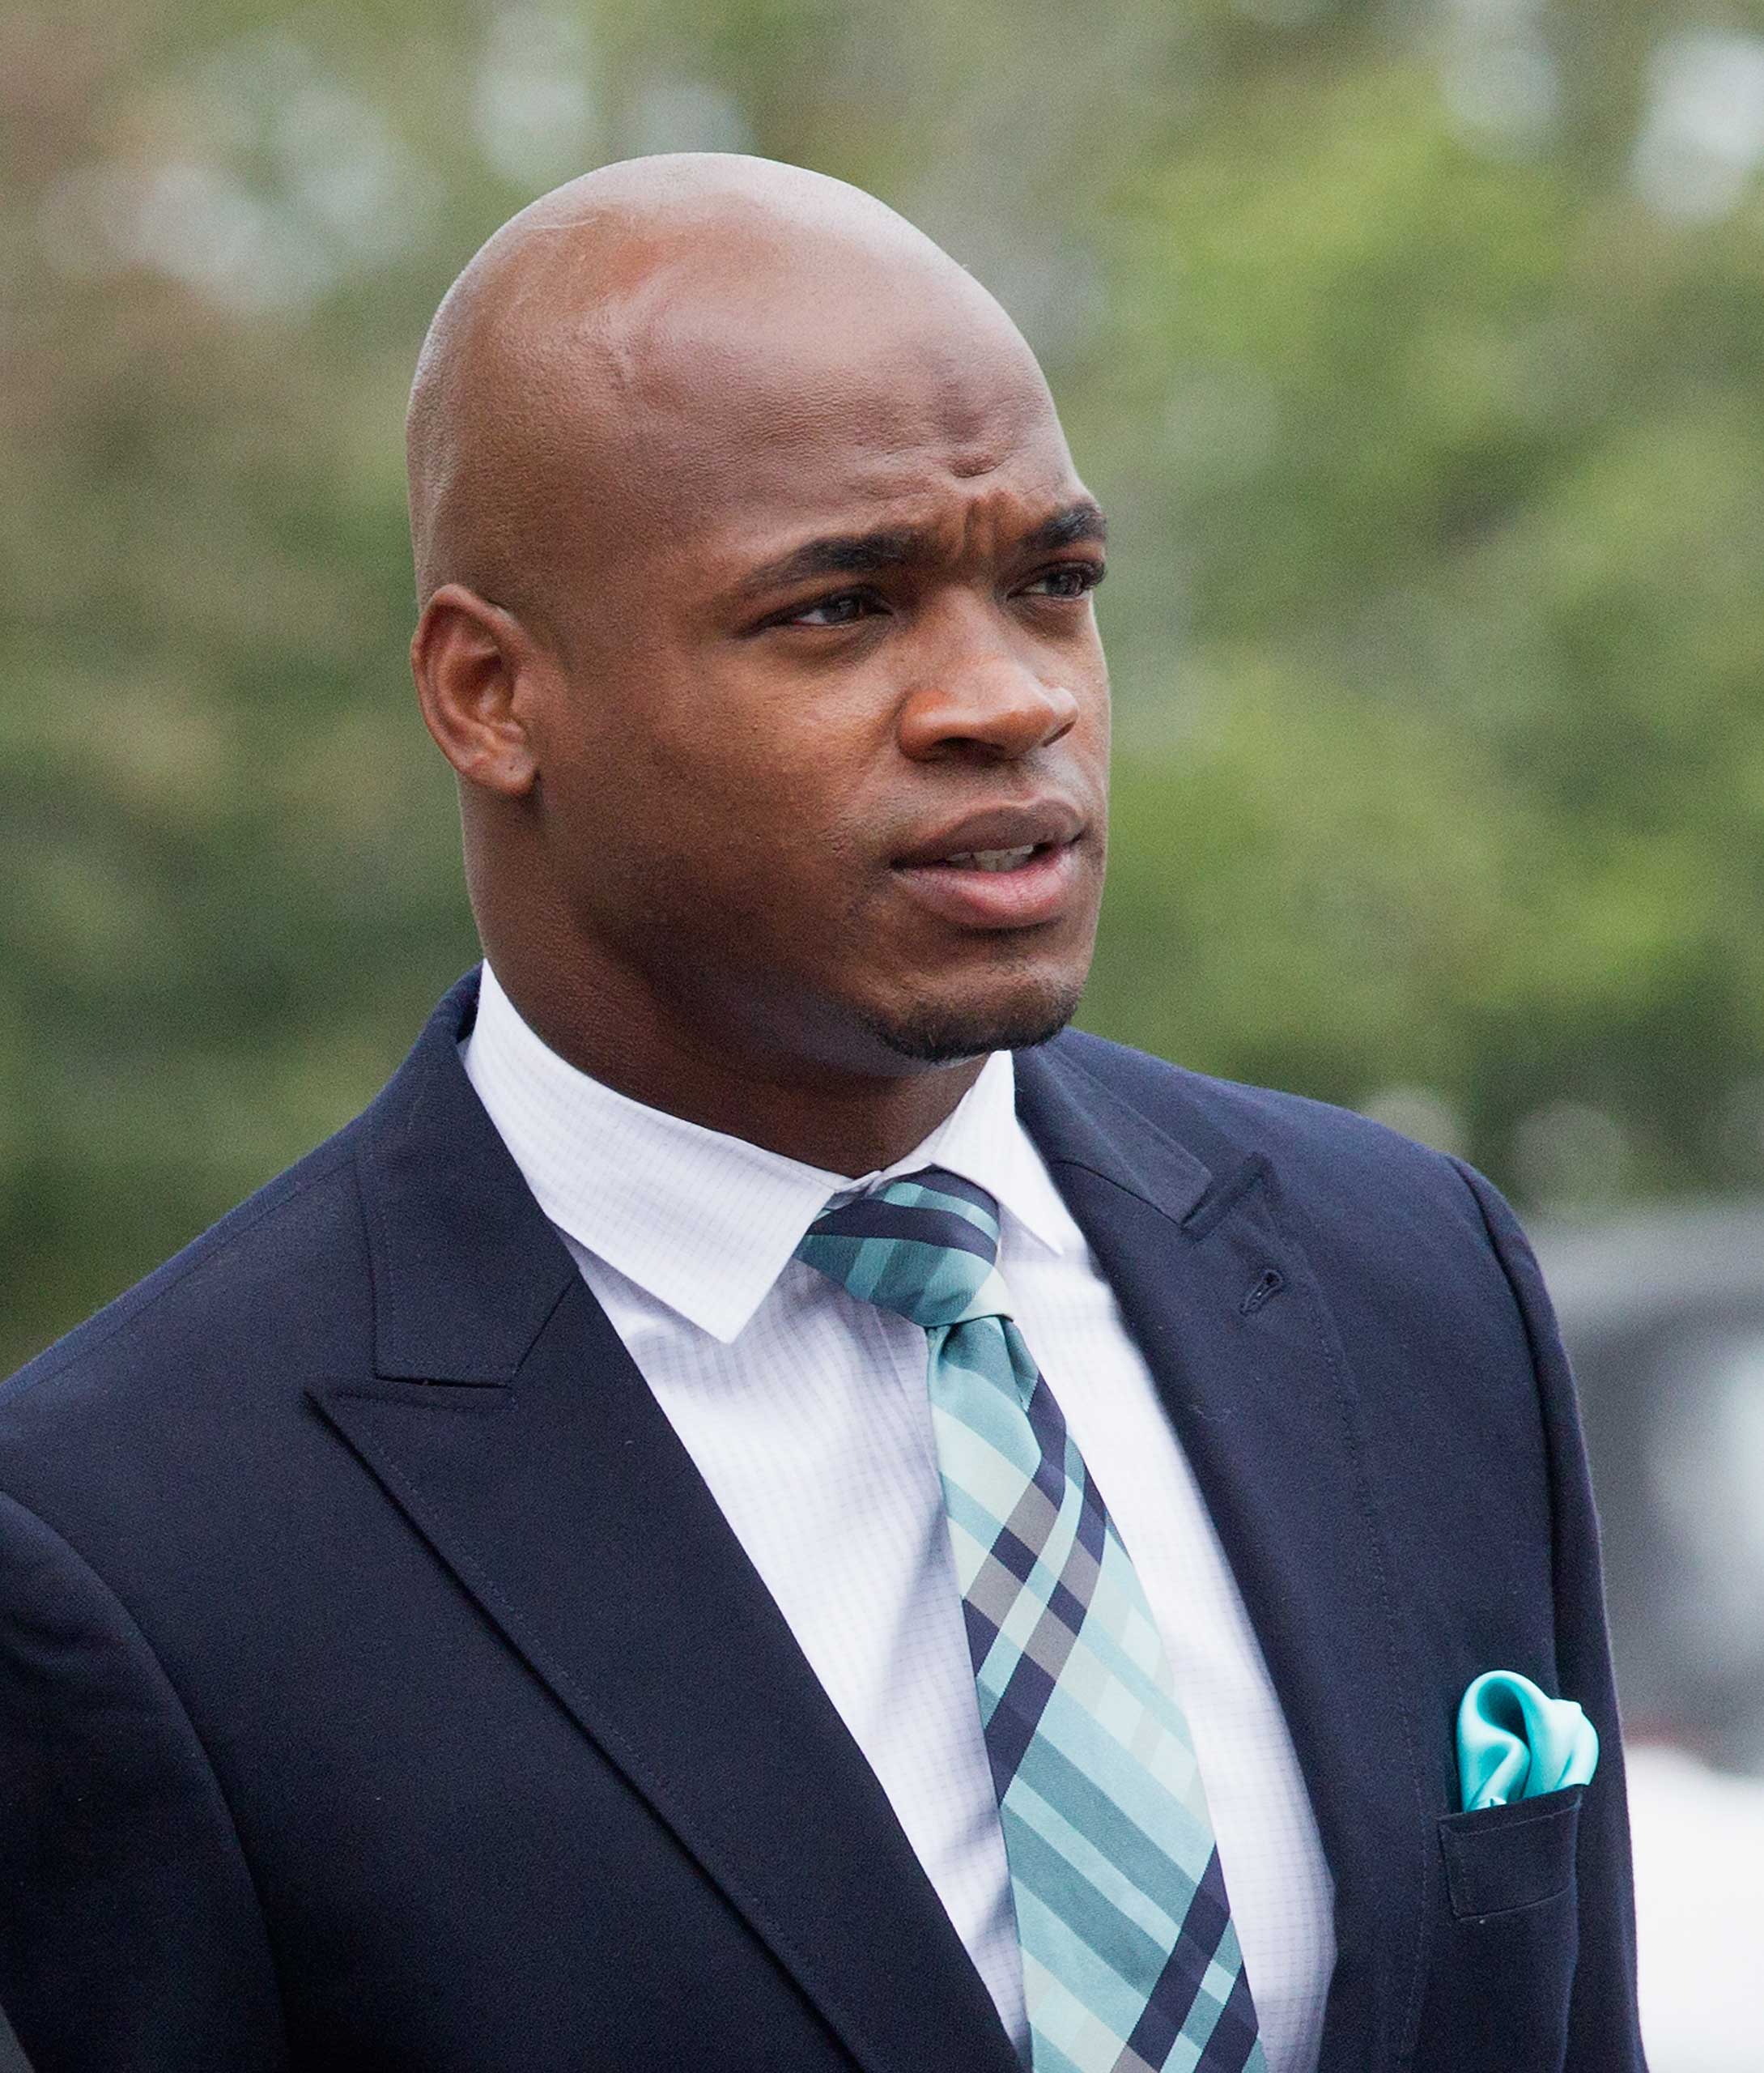 Adrian Peterson of the Minnesota Vikings arrives for a court hearing on charges of child abuse at the Montgomery County Courthouse on Nov. 4, 2014 in Conroe, Texas.